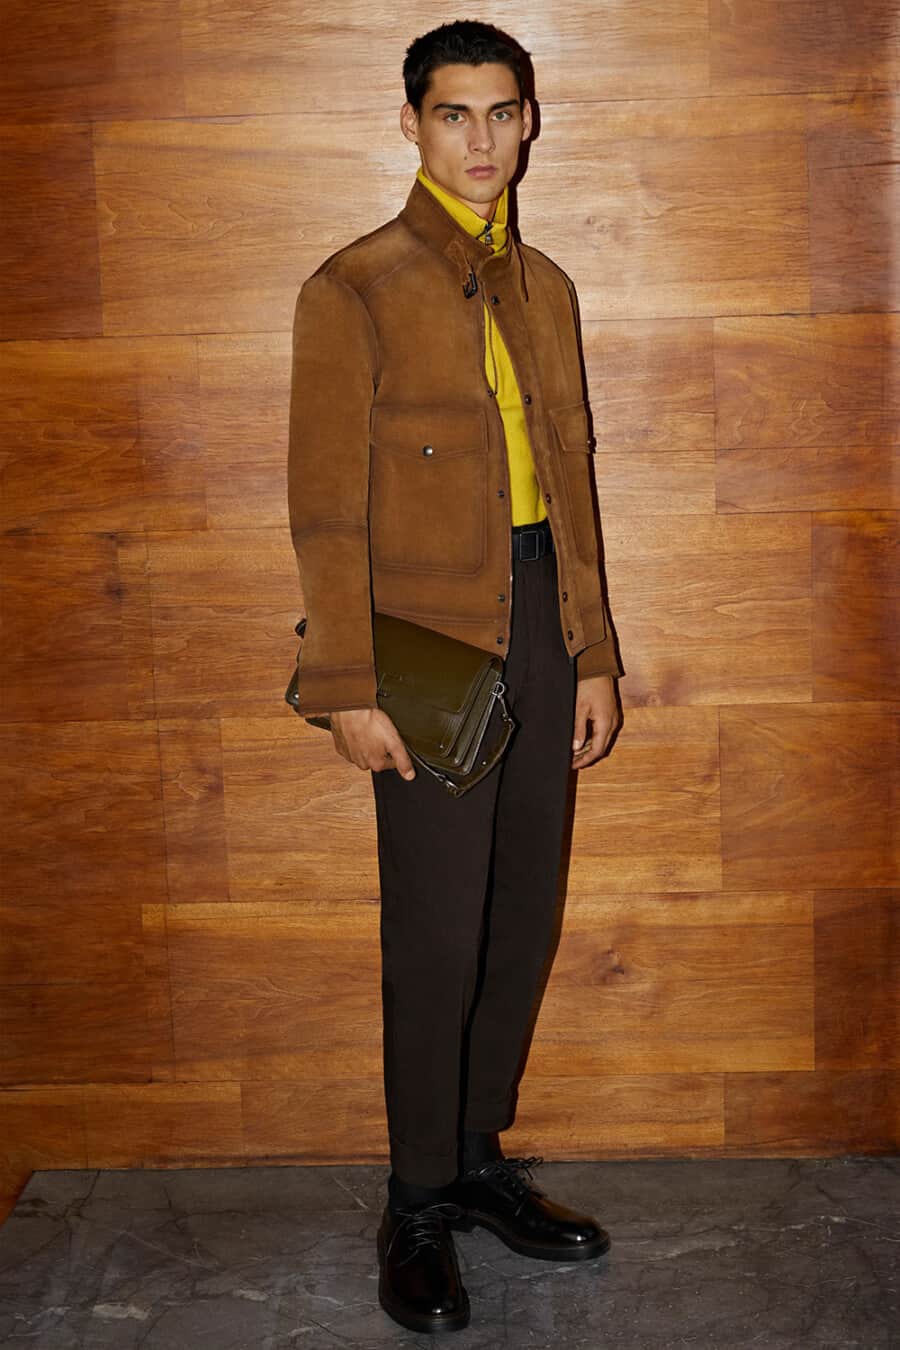 Men's dark brown pants, bright yellow funnel neck sweater, tan suede jacket, brown leather shoes and green leather bag outfit